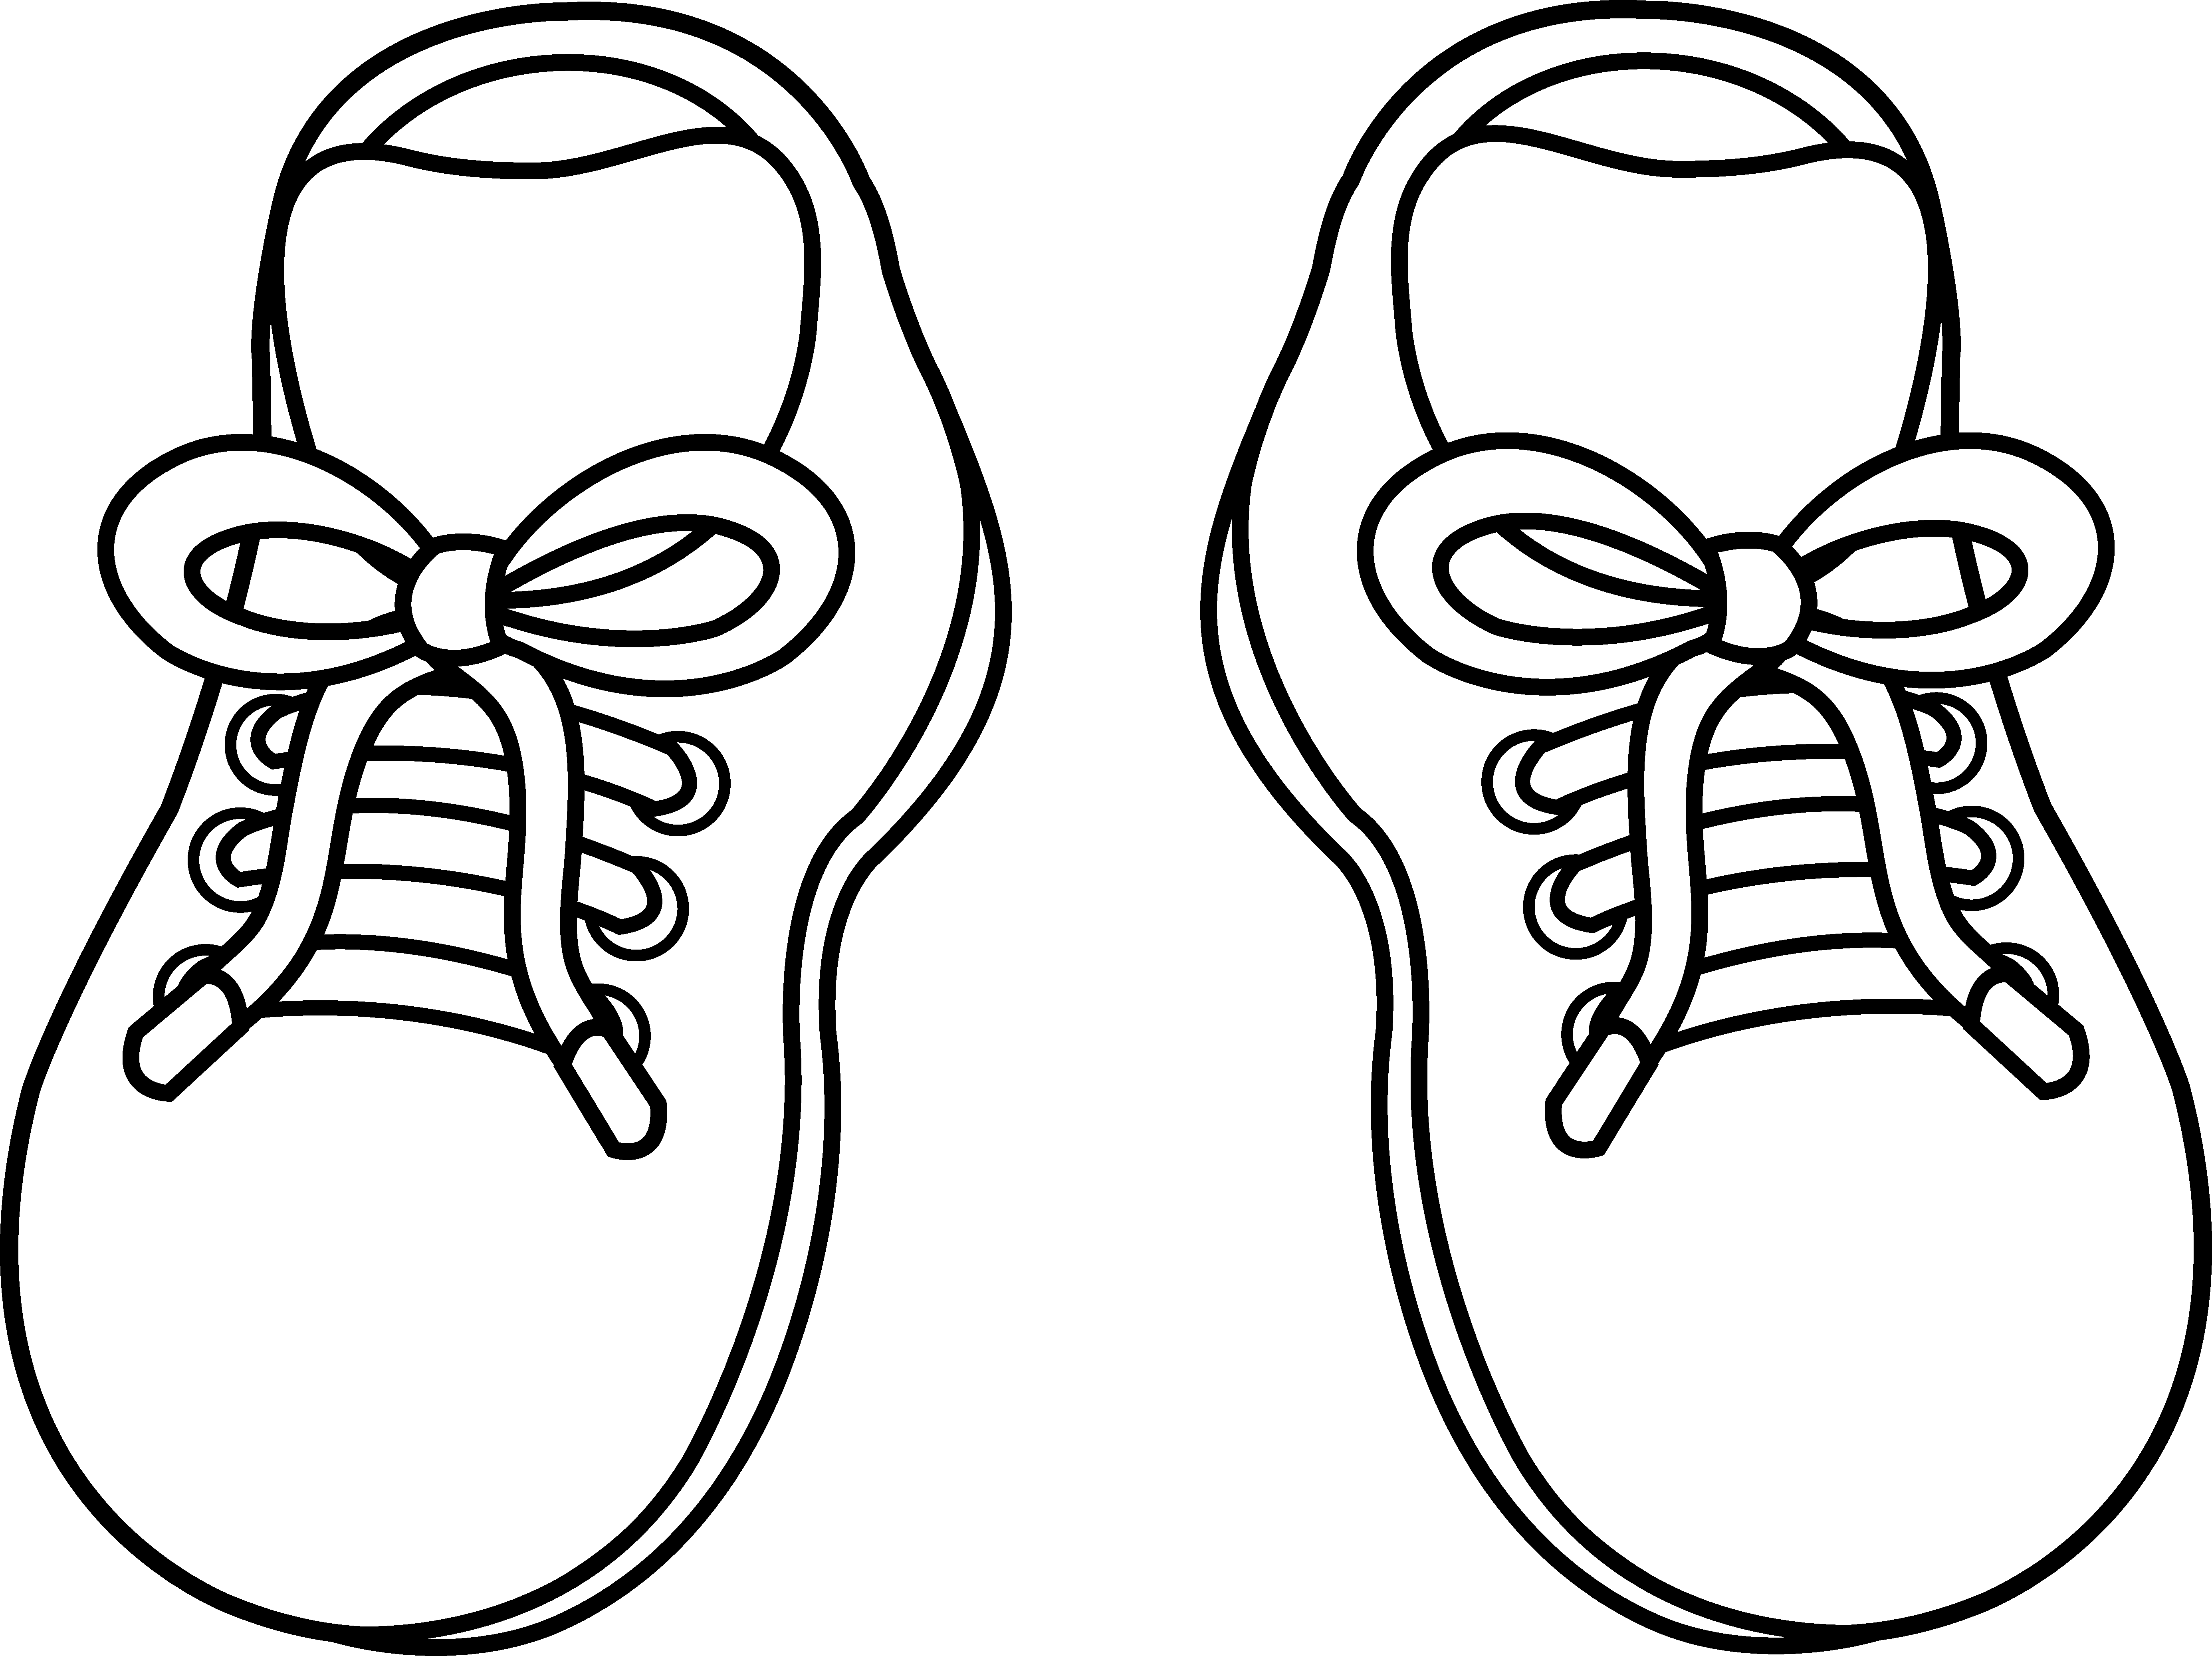 Shoes Clipart Black And White